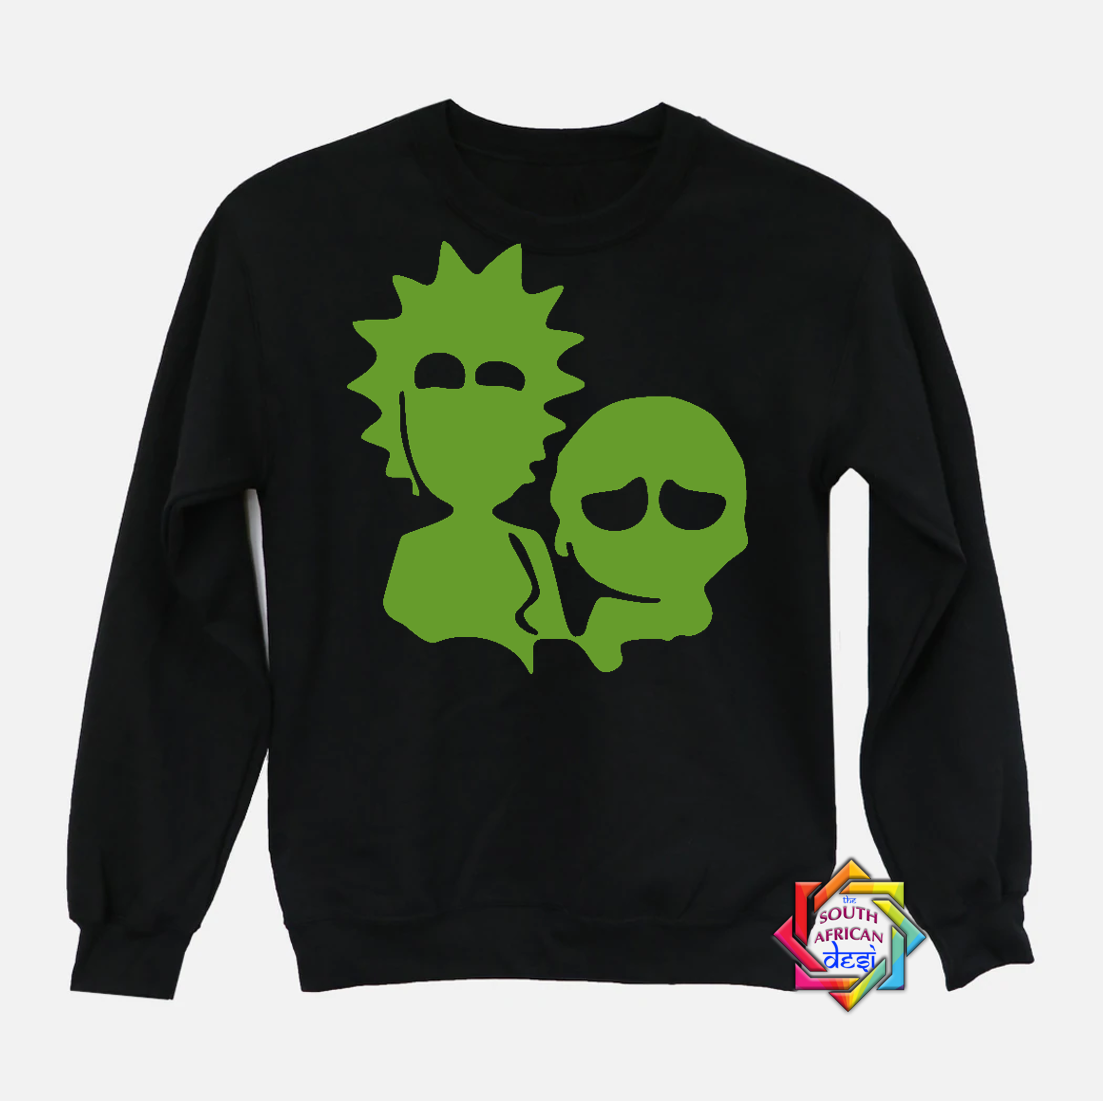 RICK AND MORTY | RICK AND MORTY HOODIE/SWEATER | UNISEX